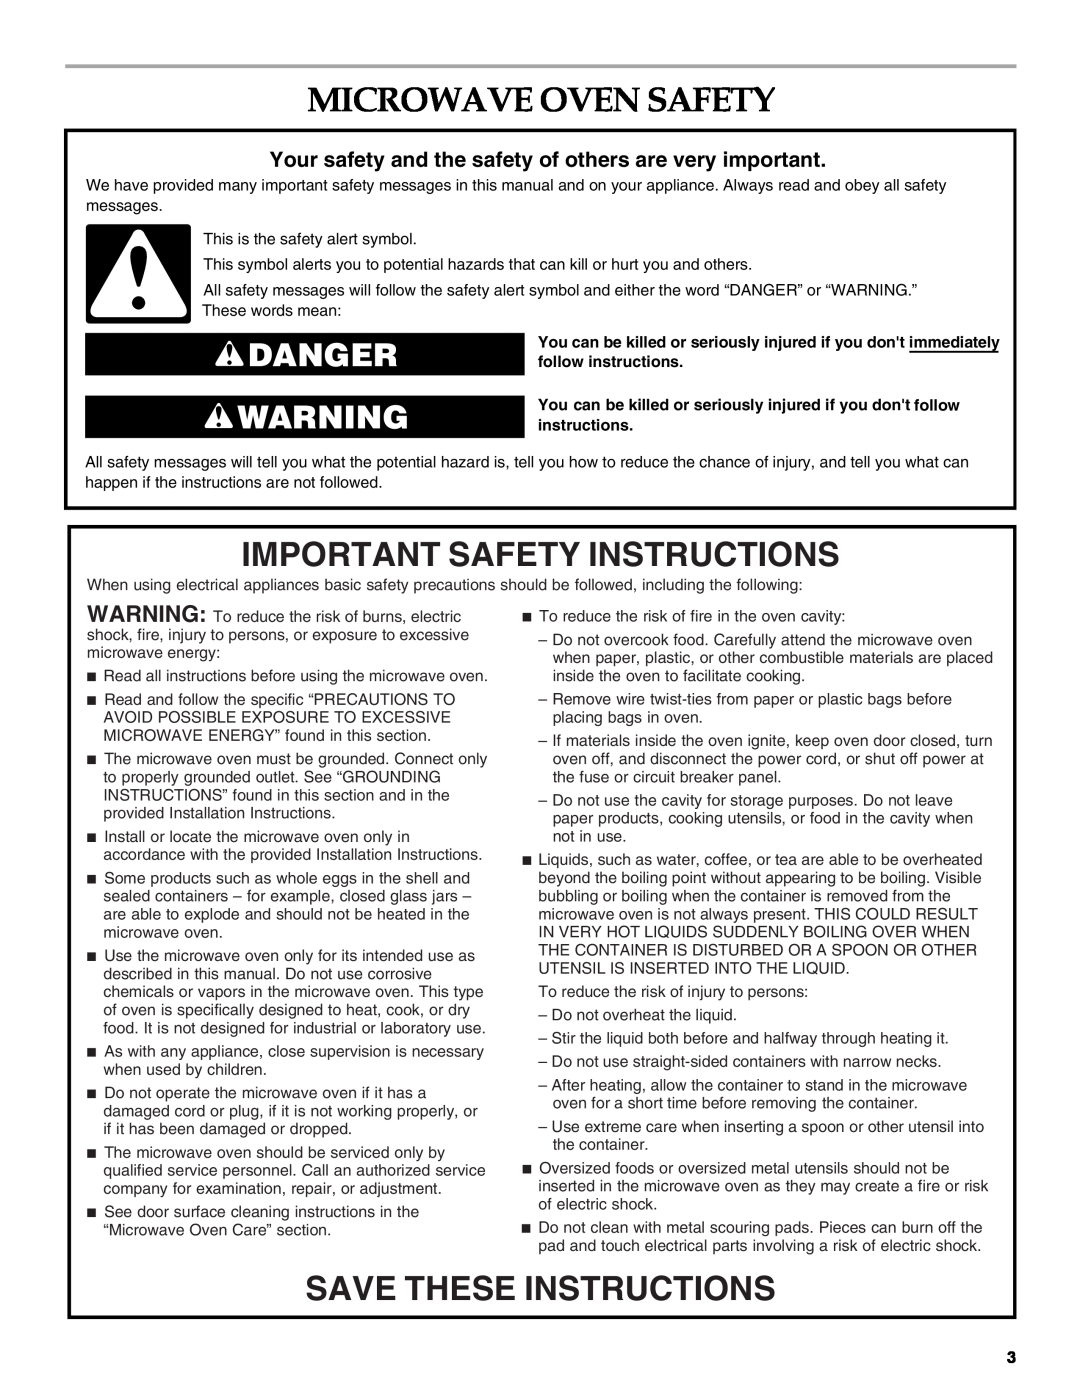 KitchenAid KCMS2055SSS manual Microwave Oven Safety, Important Safety Instructions, Save These Instructions, Danger 